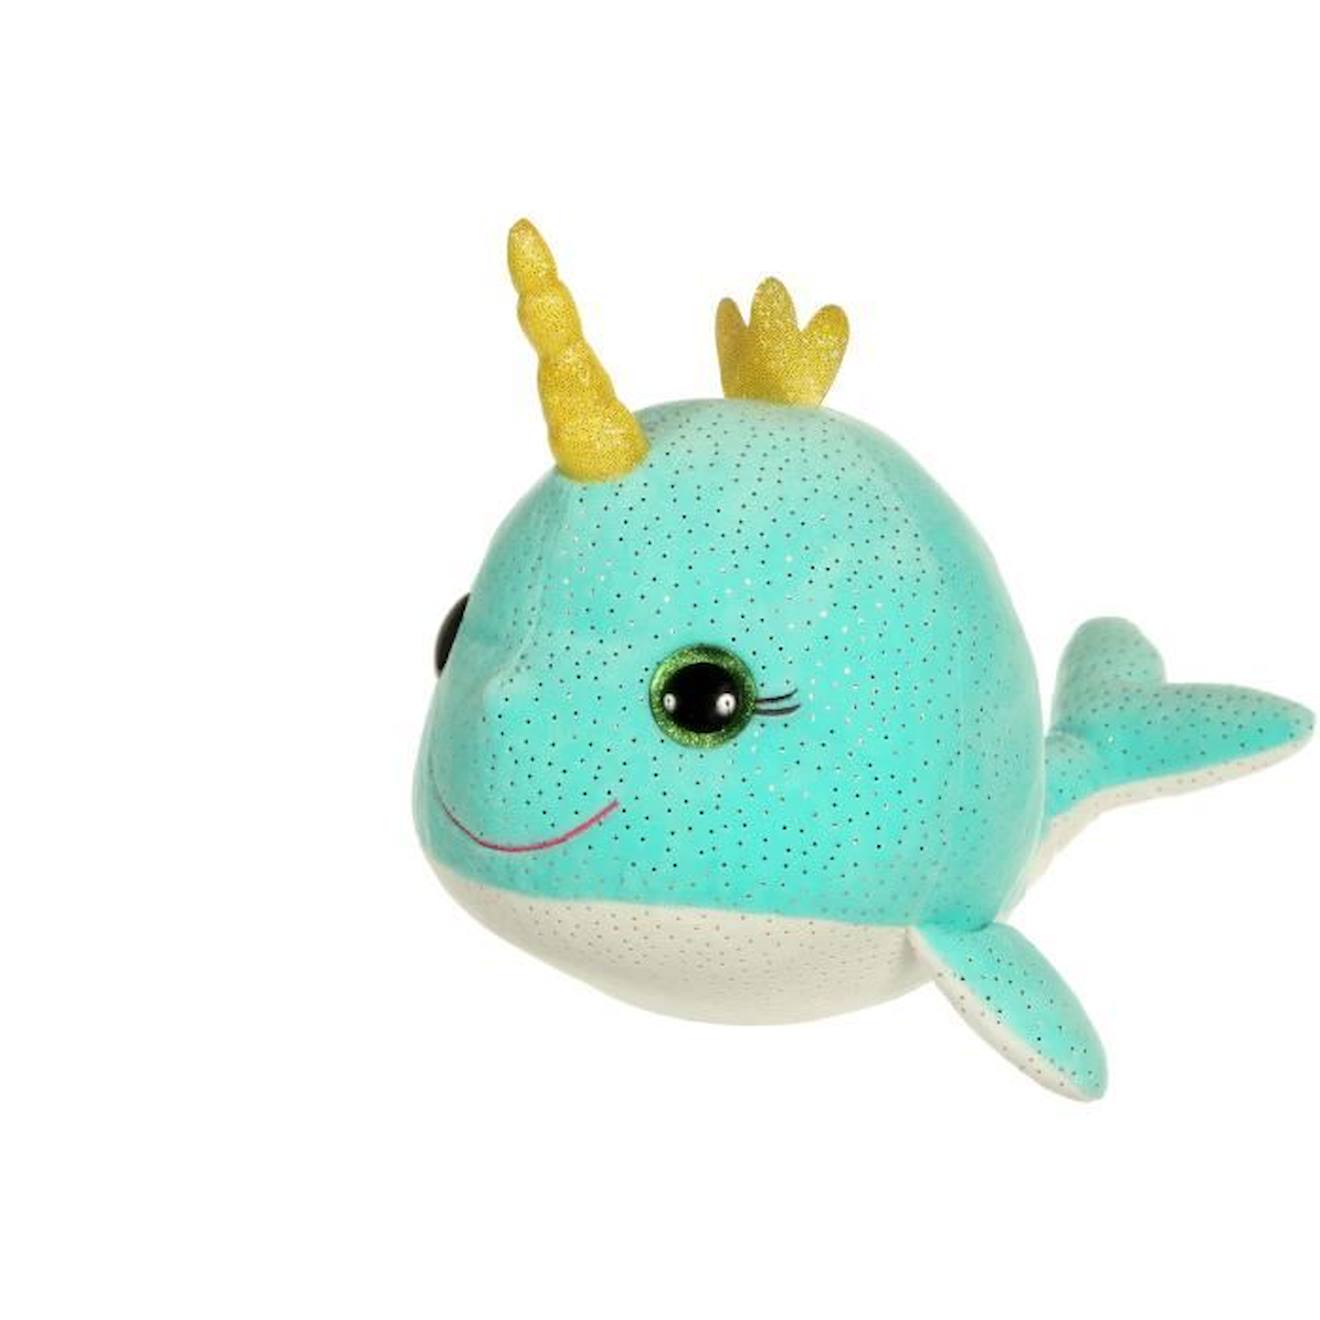 Peluche Sonore - Gipsy - Bella Bloo Friends Narval - 30 Cm - Bleu Turquoise Vert